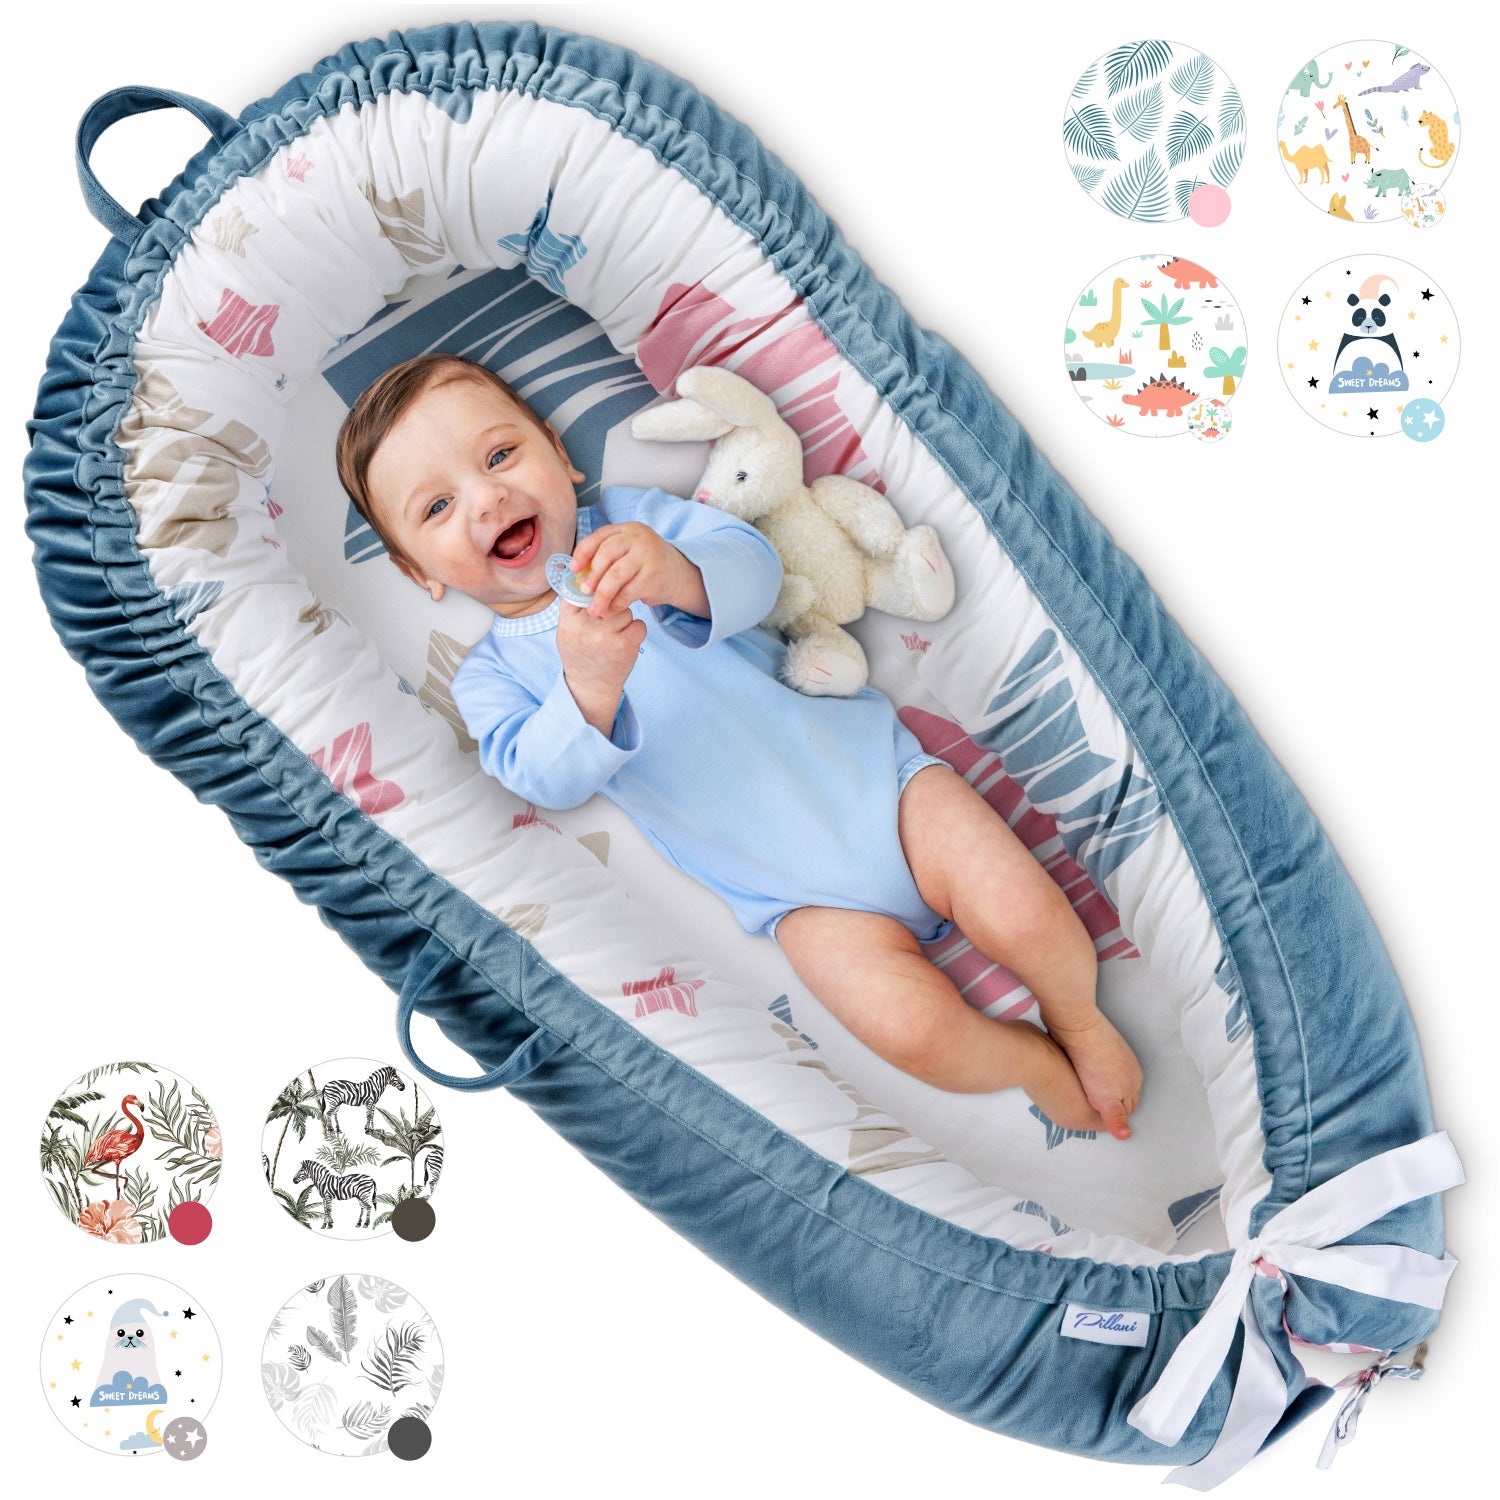 Pillani Baby Lounger For Newborn - Infant Lounger For 0-12 Months